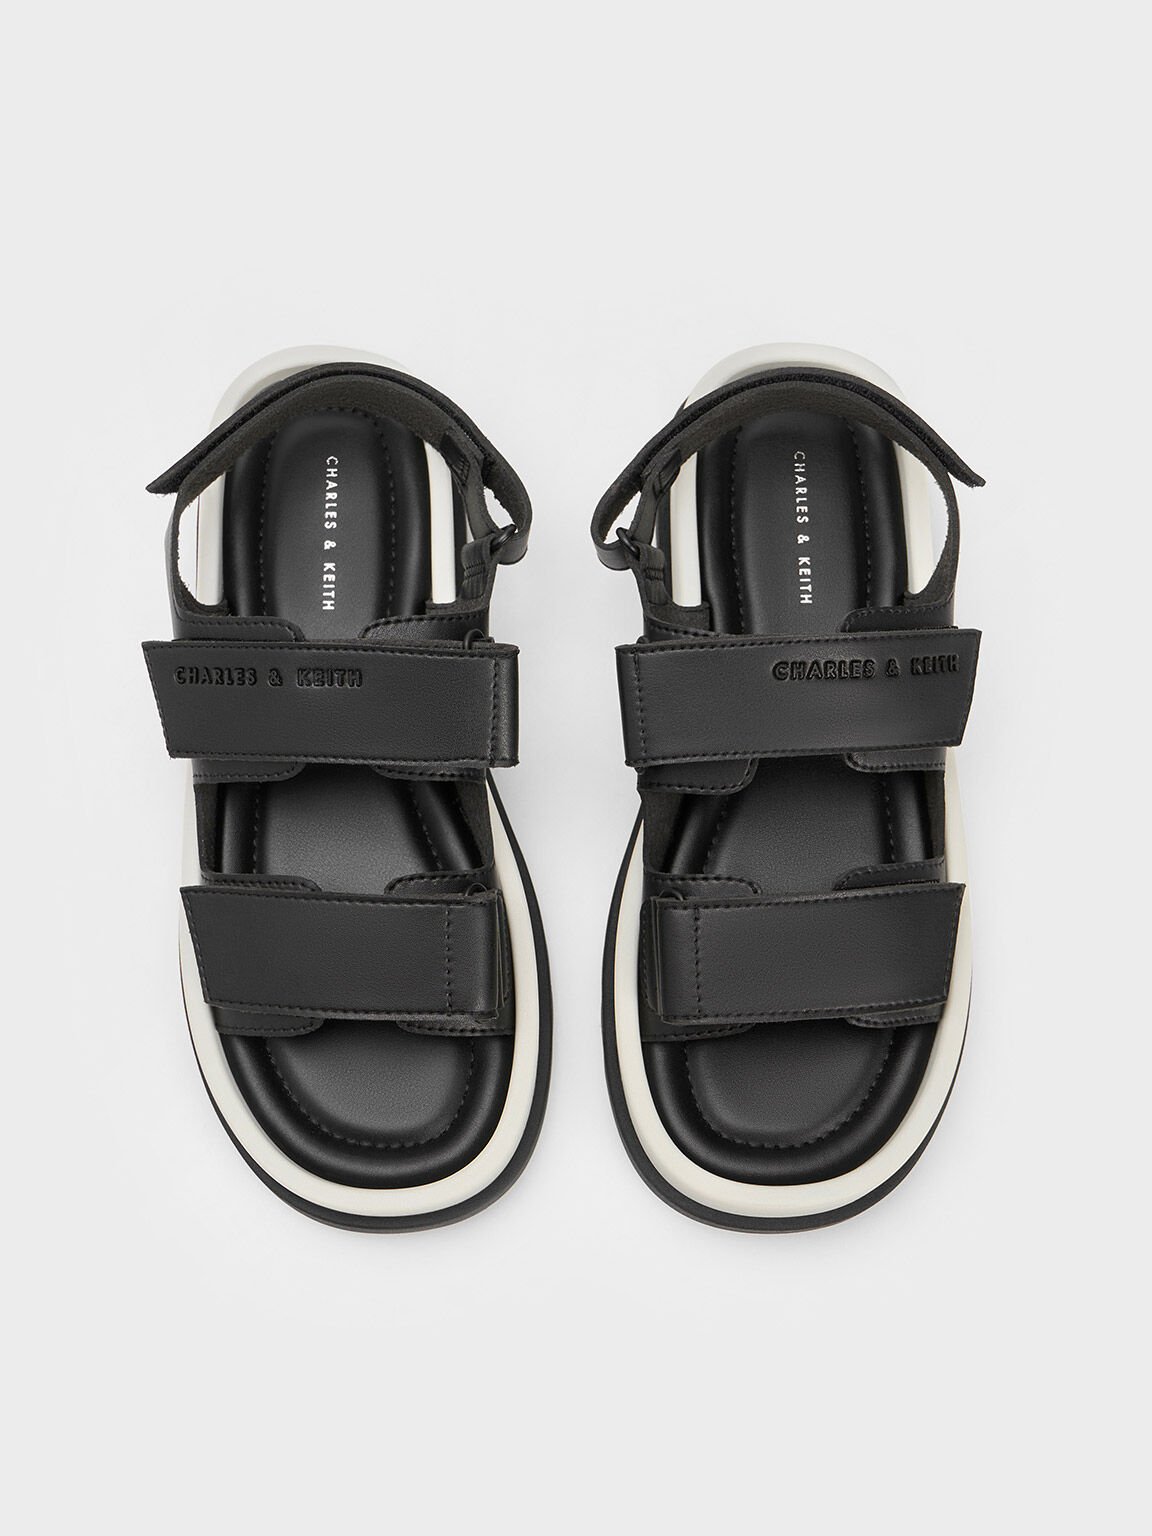 Jong Centrum Interactie Black Buckled Sports Sandals - CHARLES & KEITH US